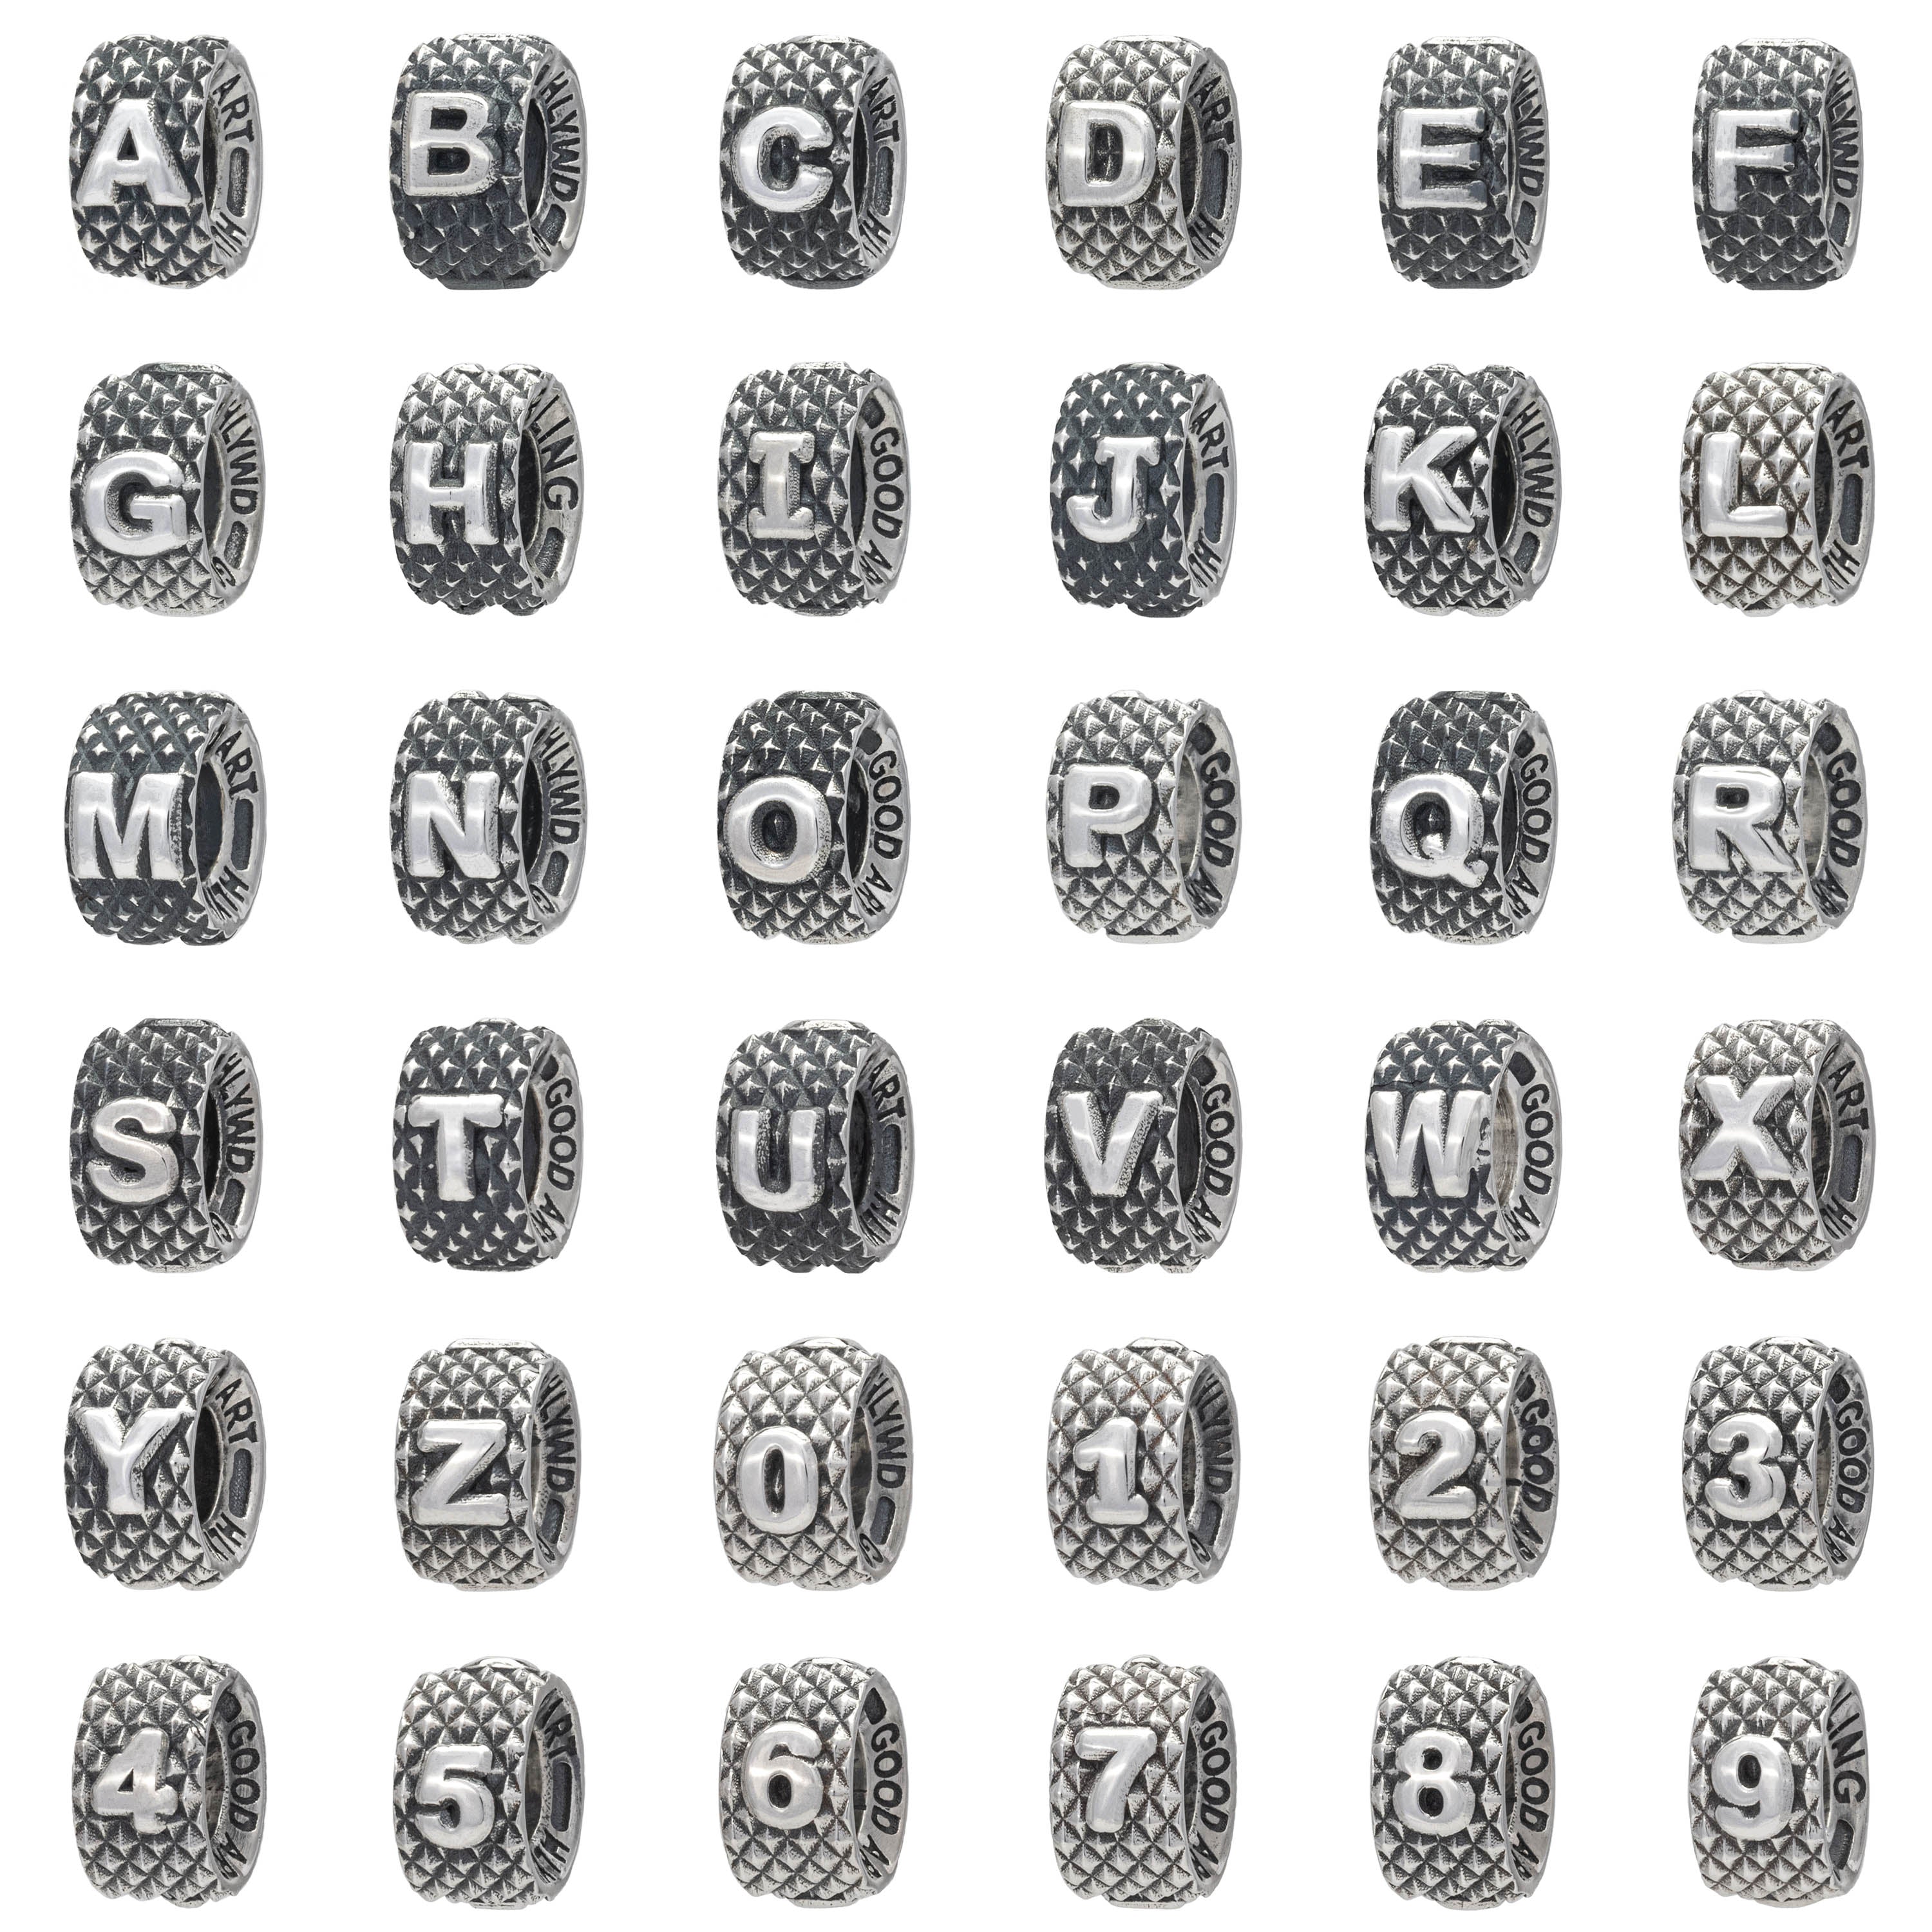 This is a photo of all the abc rondels and the numbers we offer.